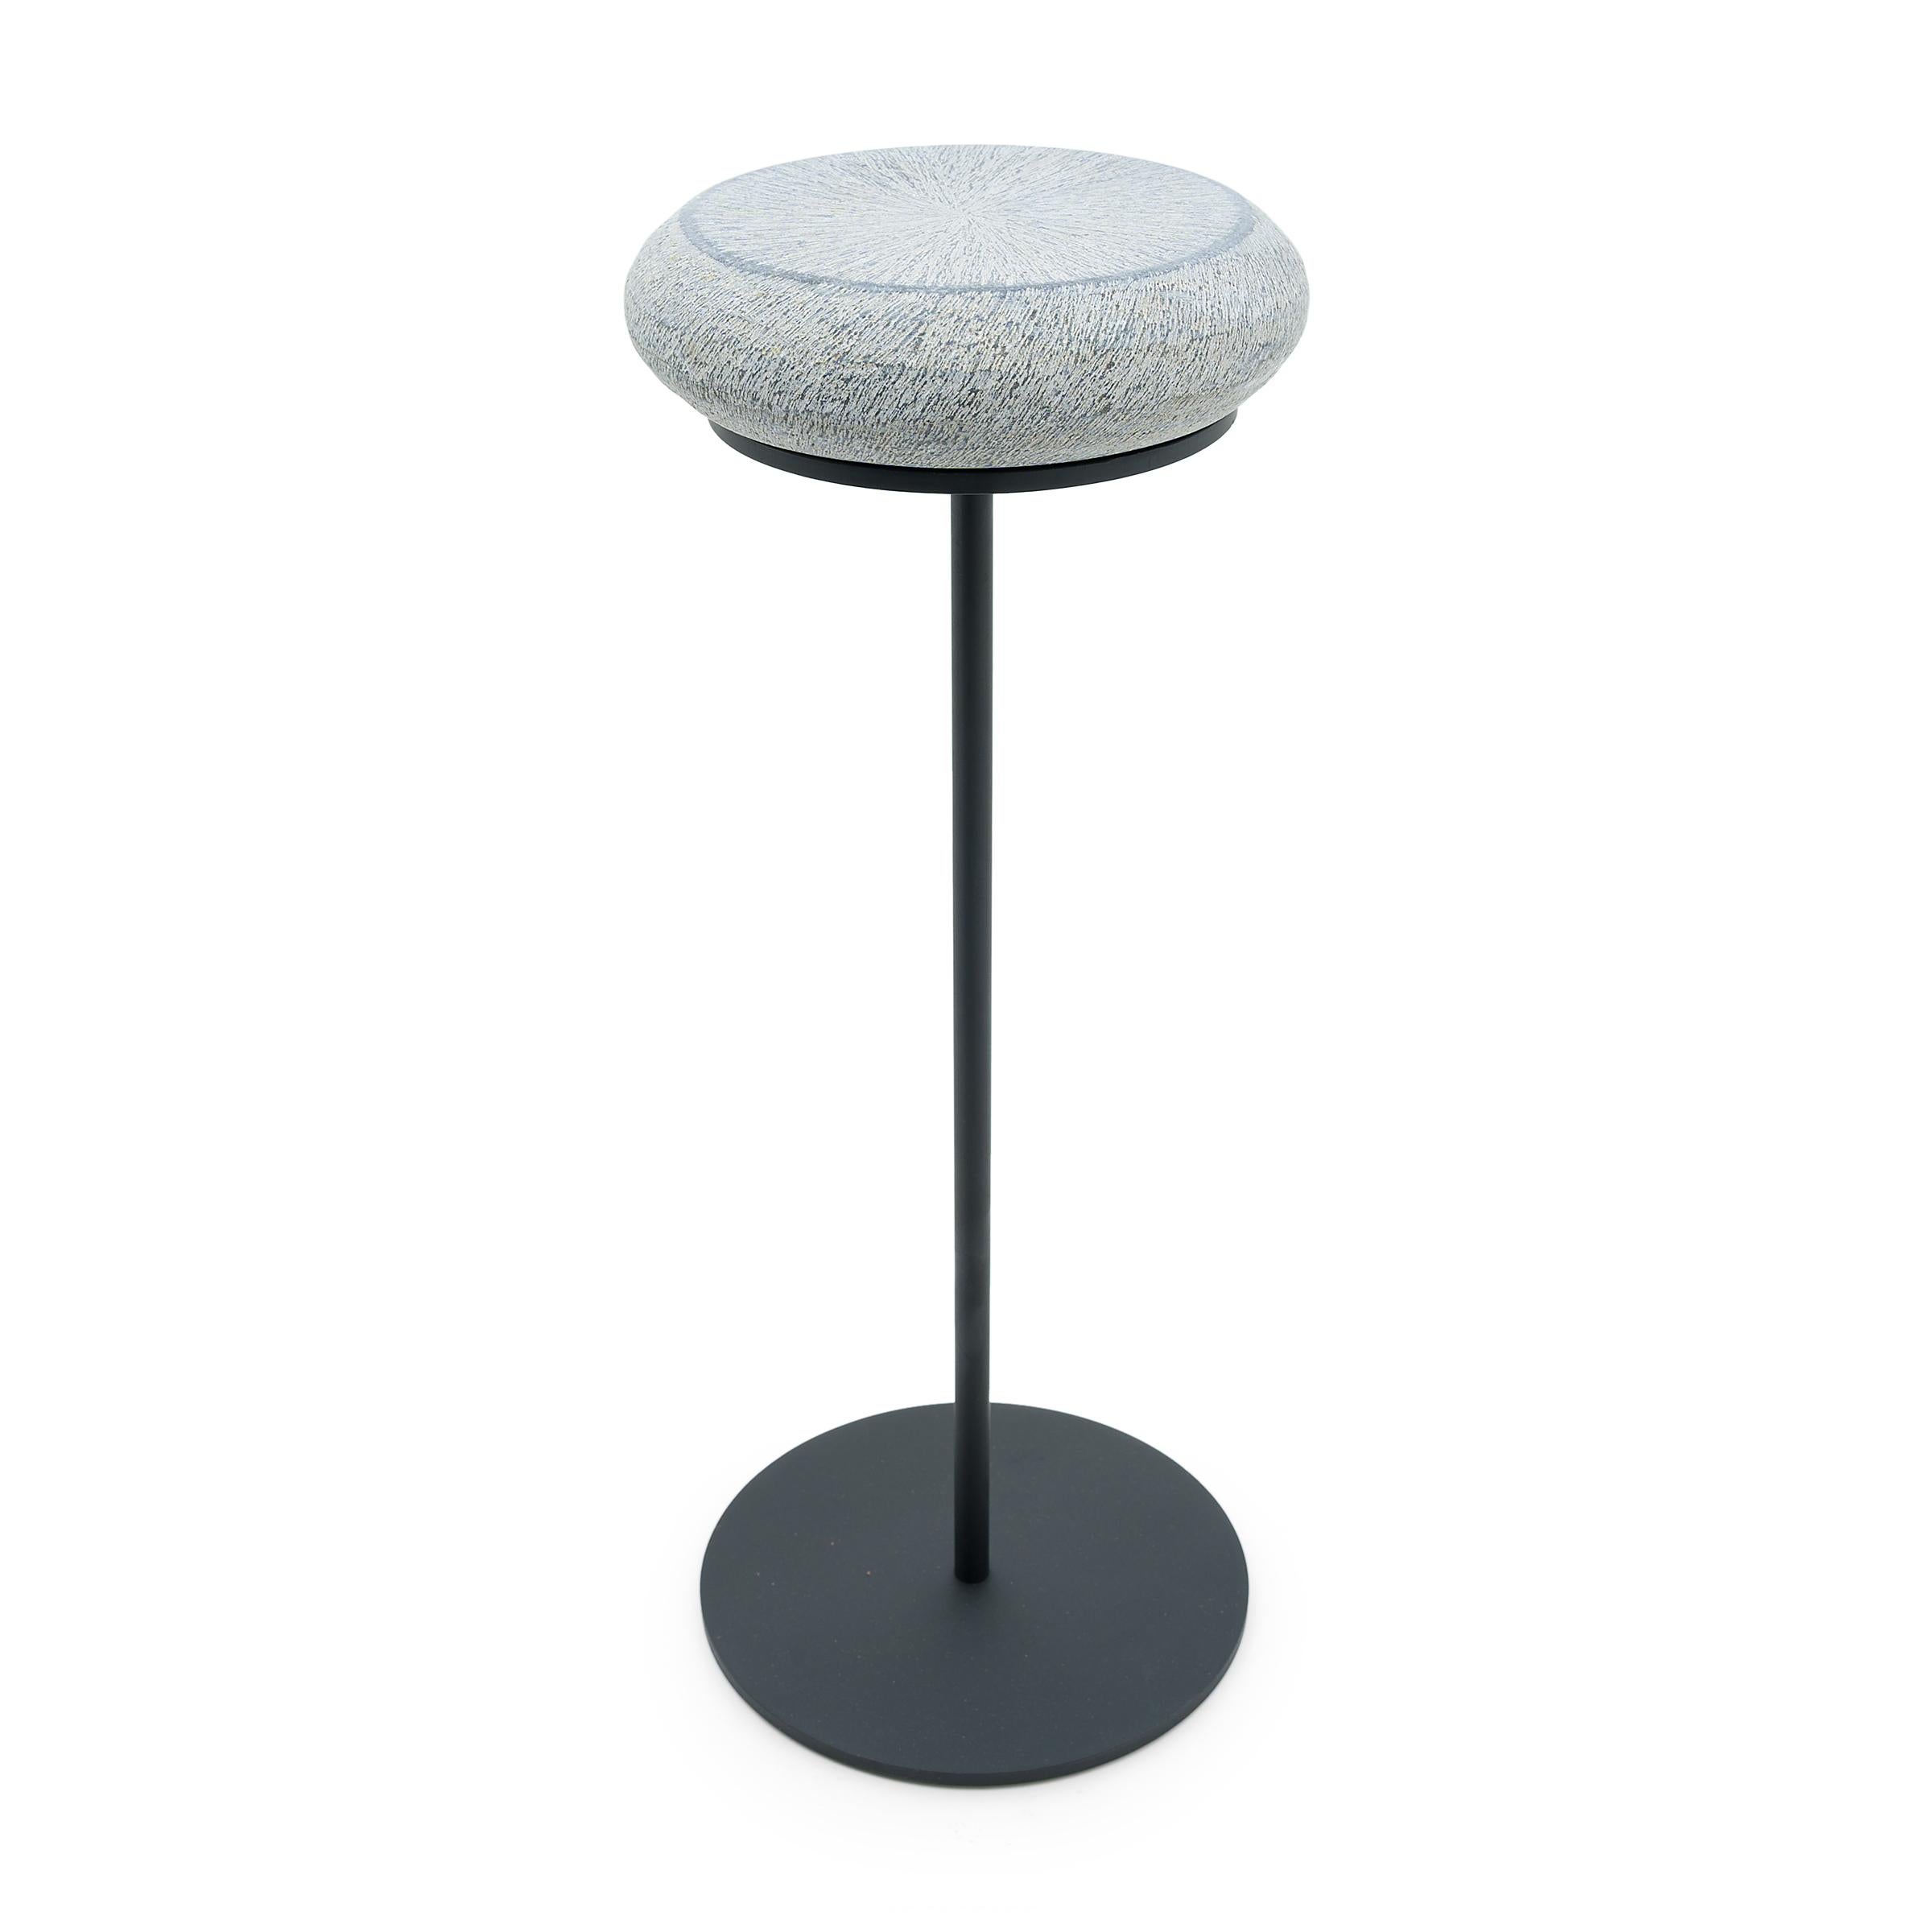 Chinese Petite Stone Drum Side Table For Sale